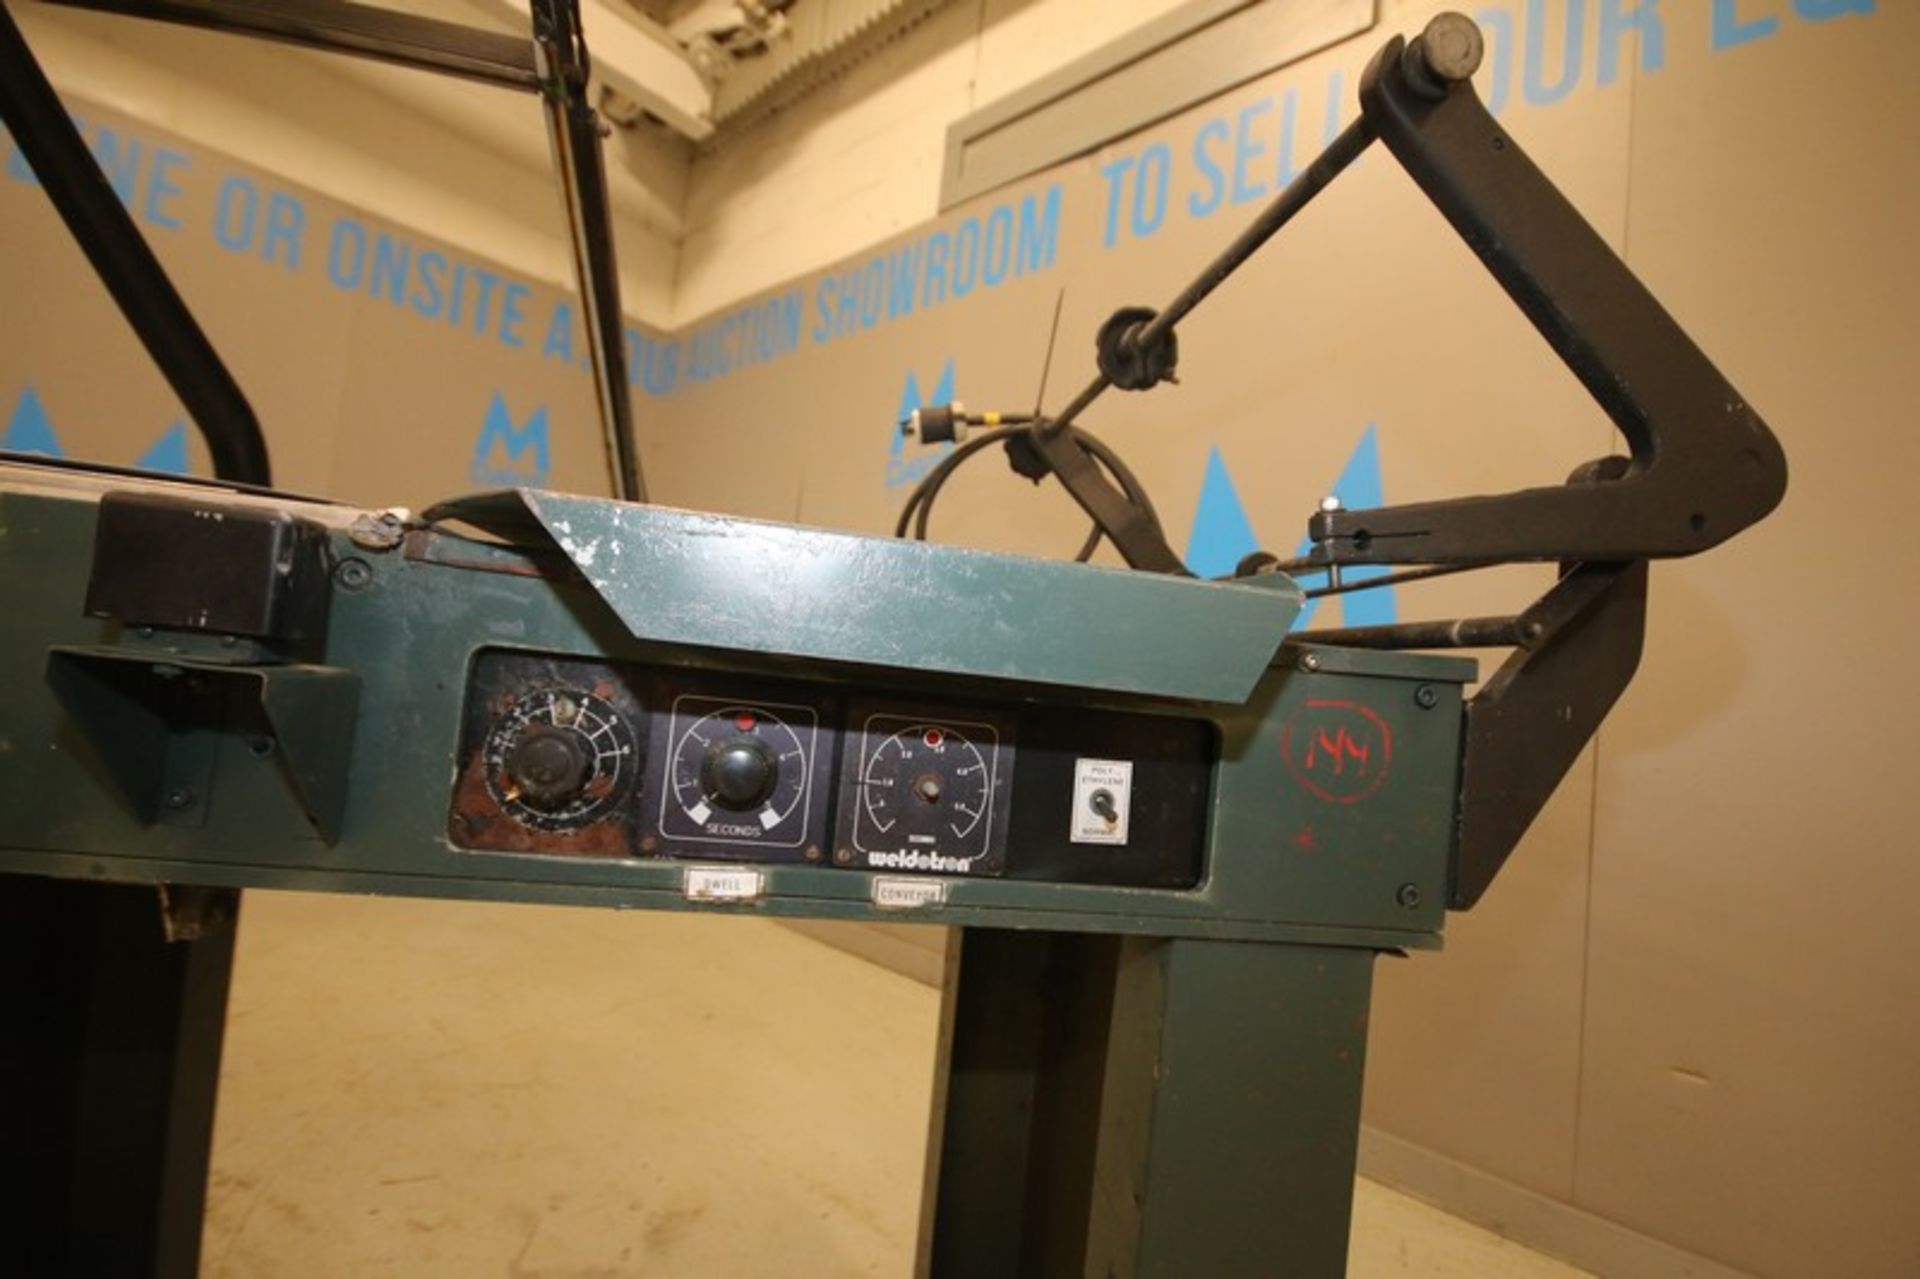 Weldotron Portable L - Bar Sealer, Model 6401, SN LW20764 with 20" W x 17" L Sealing Area, Shrink - Image 4 of 13